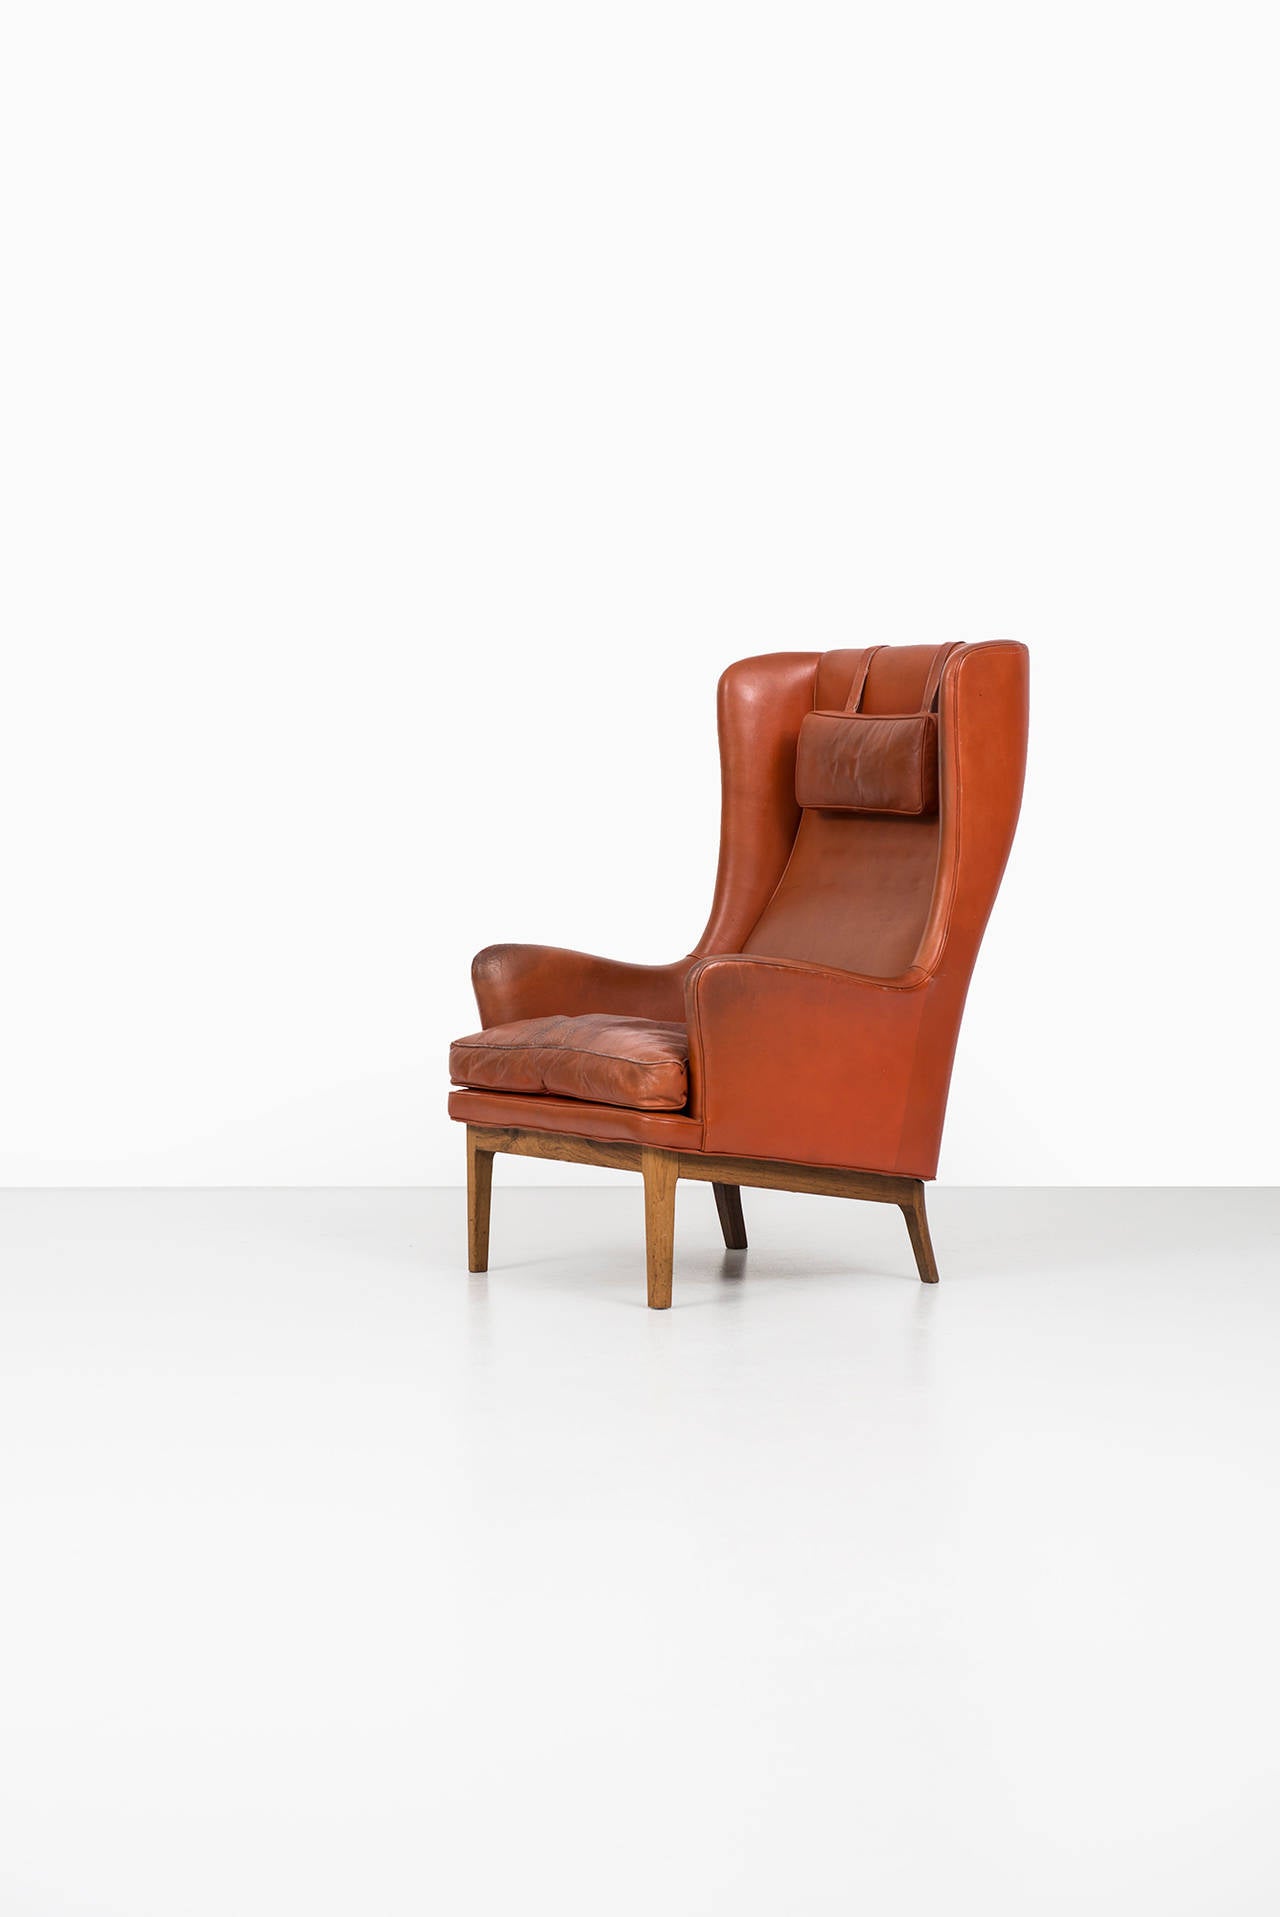 Rosewood Arne Norell wingback easy chair in rosewood and leather by Norell AB in Sweden